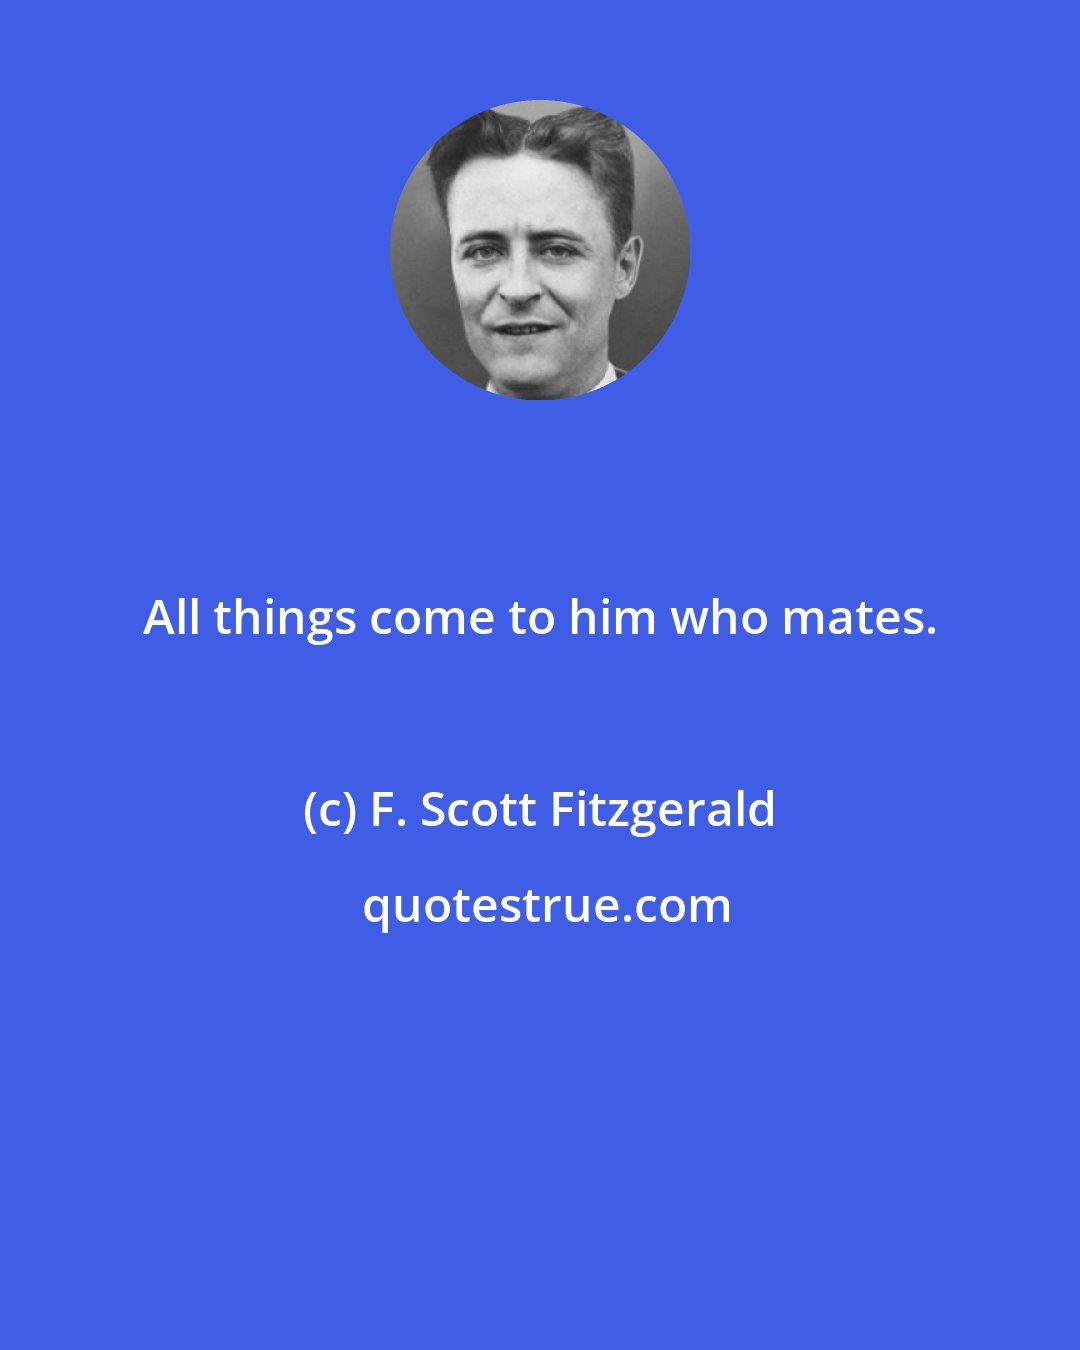 F. Scott Fitzgerald: All things come to him who mates.